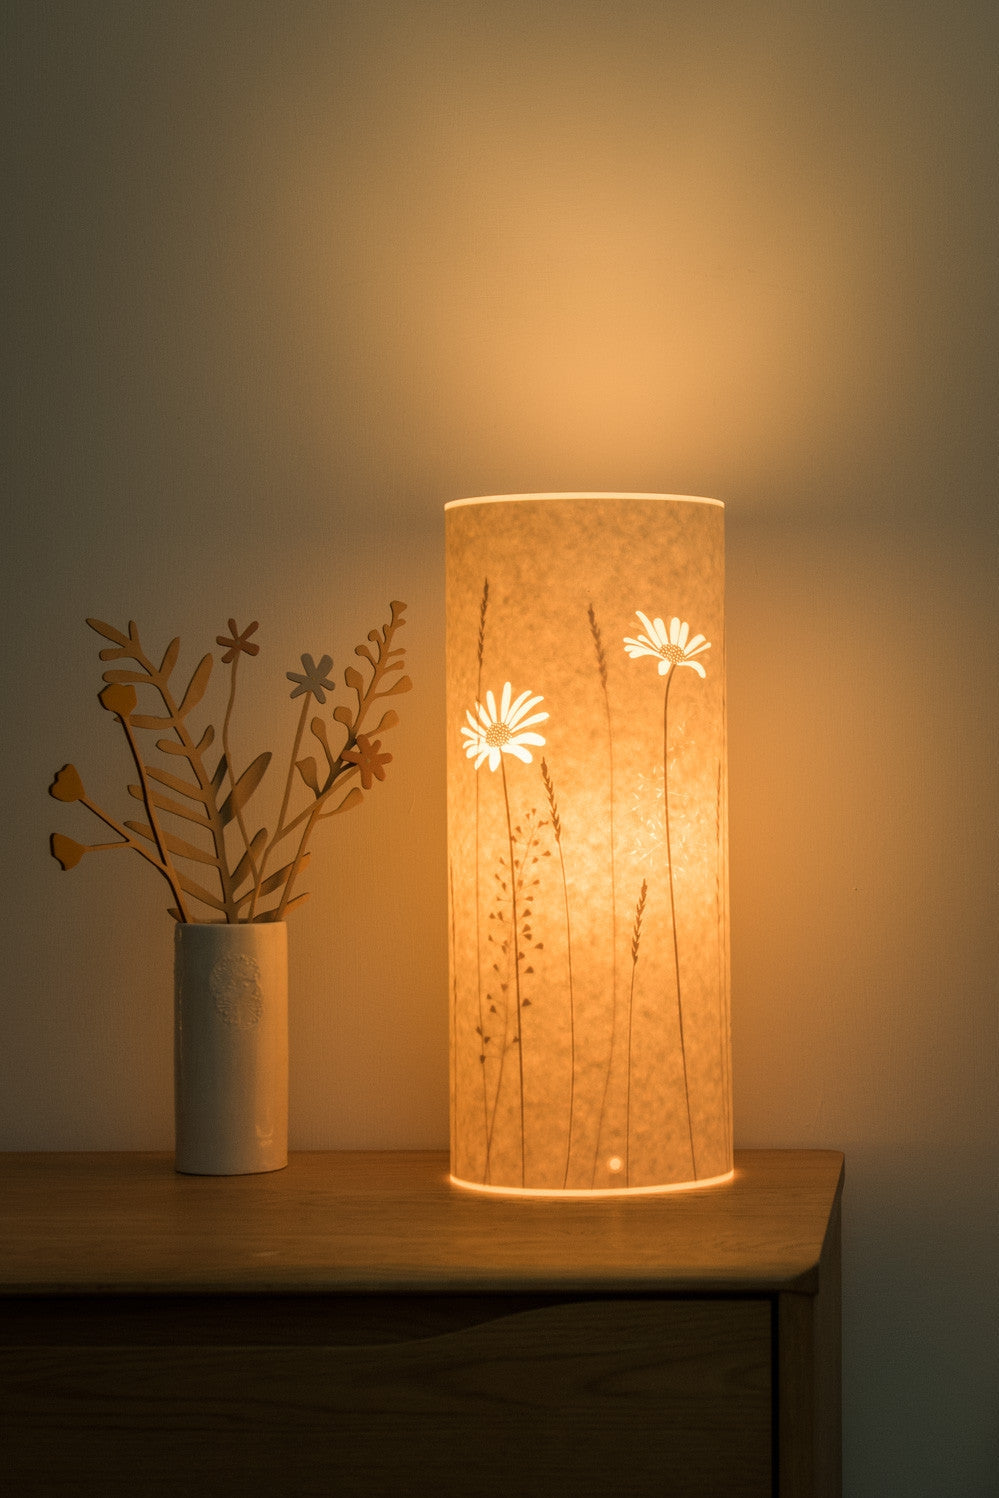 Limited Edition Daisy Meadow lamp